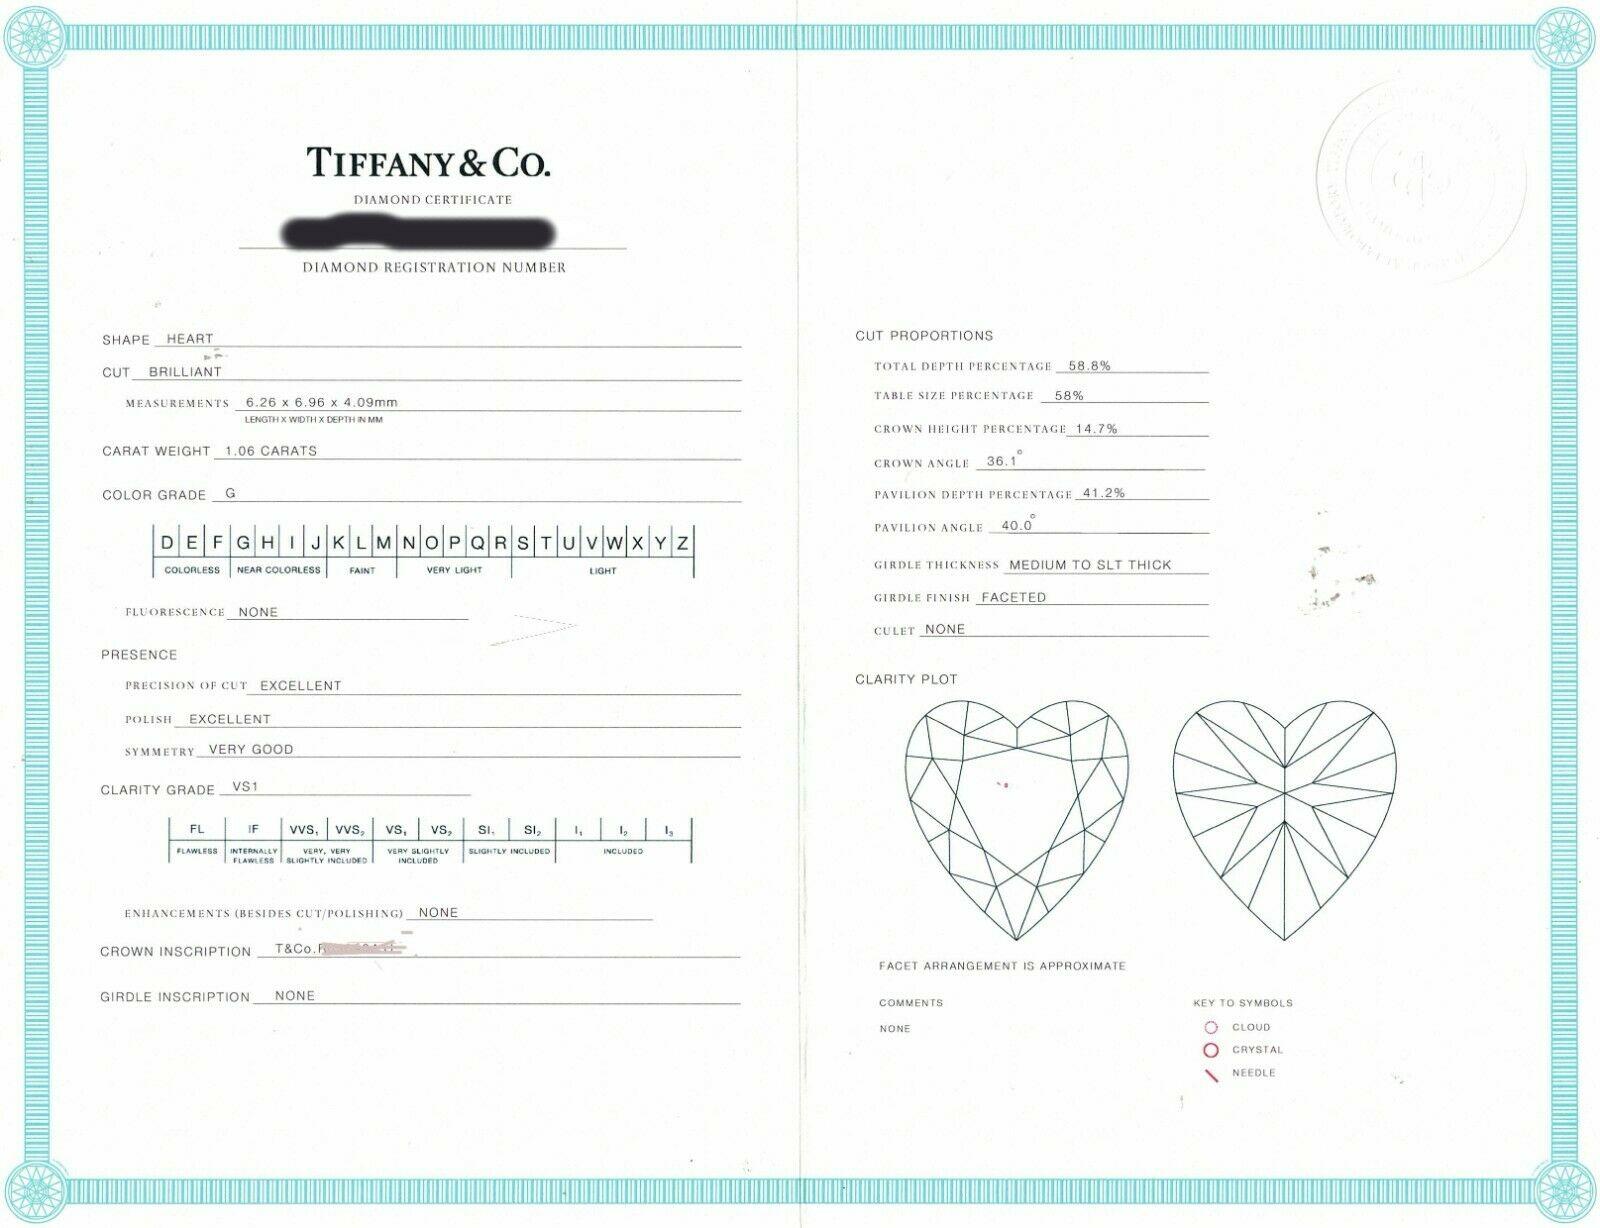 Tiffany 1.06cts. Heart Shape Diamond Platinum Solitaire with All Papers 1